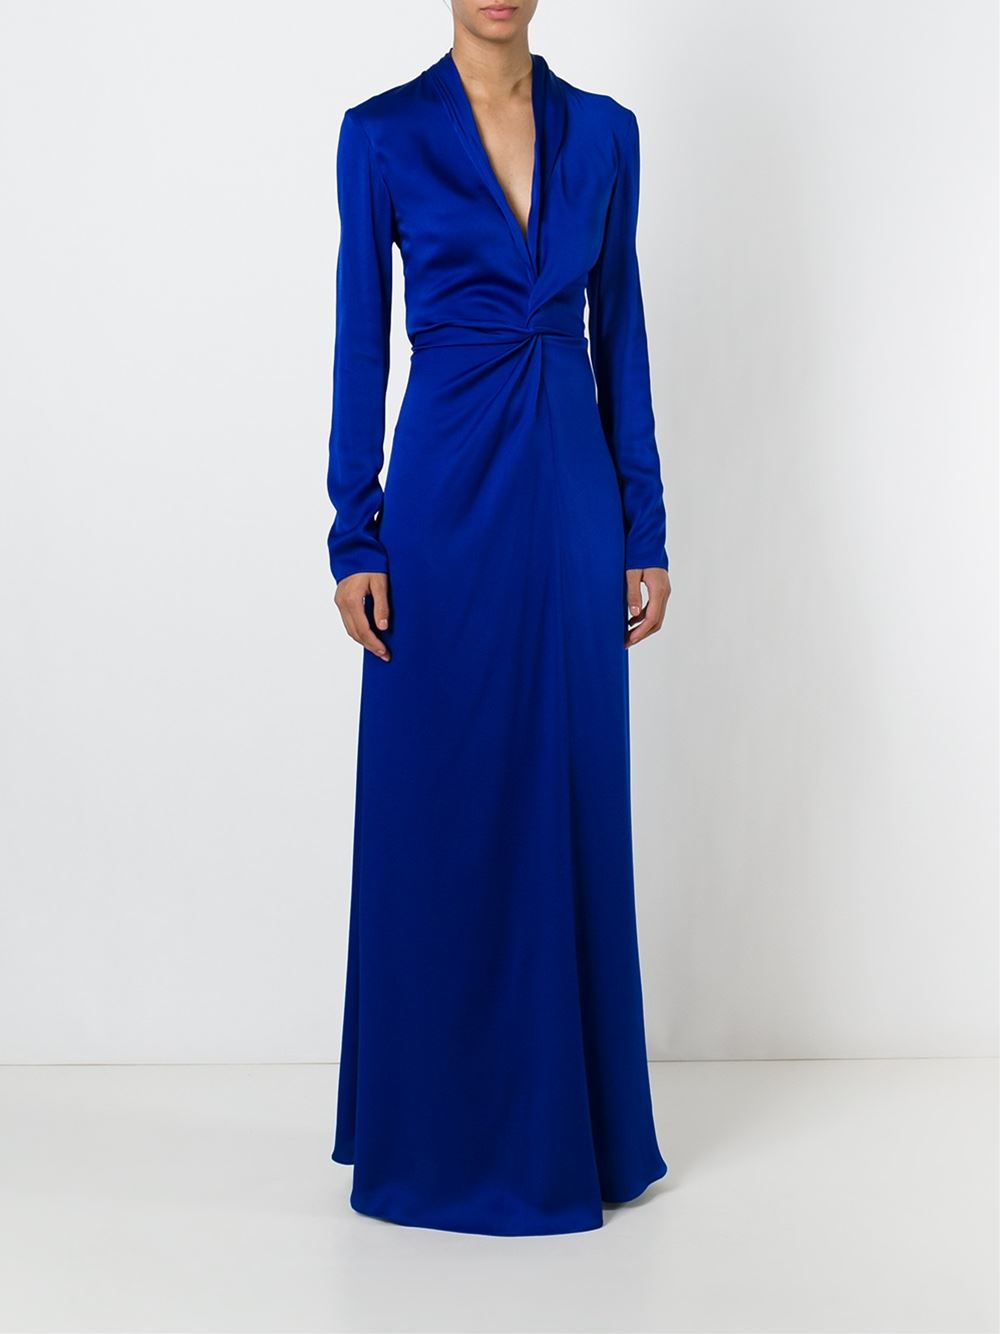 Lyst - Lanvin Draped Evening Gown in Blue